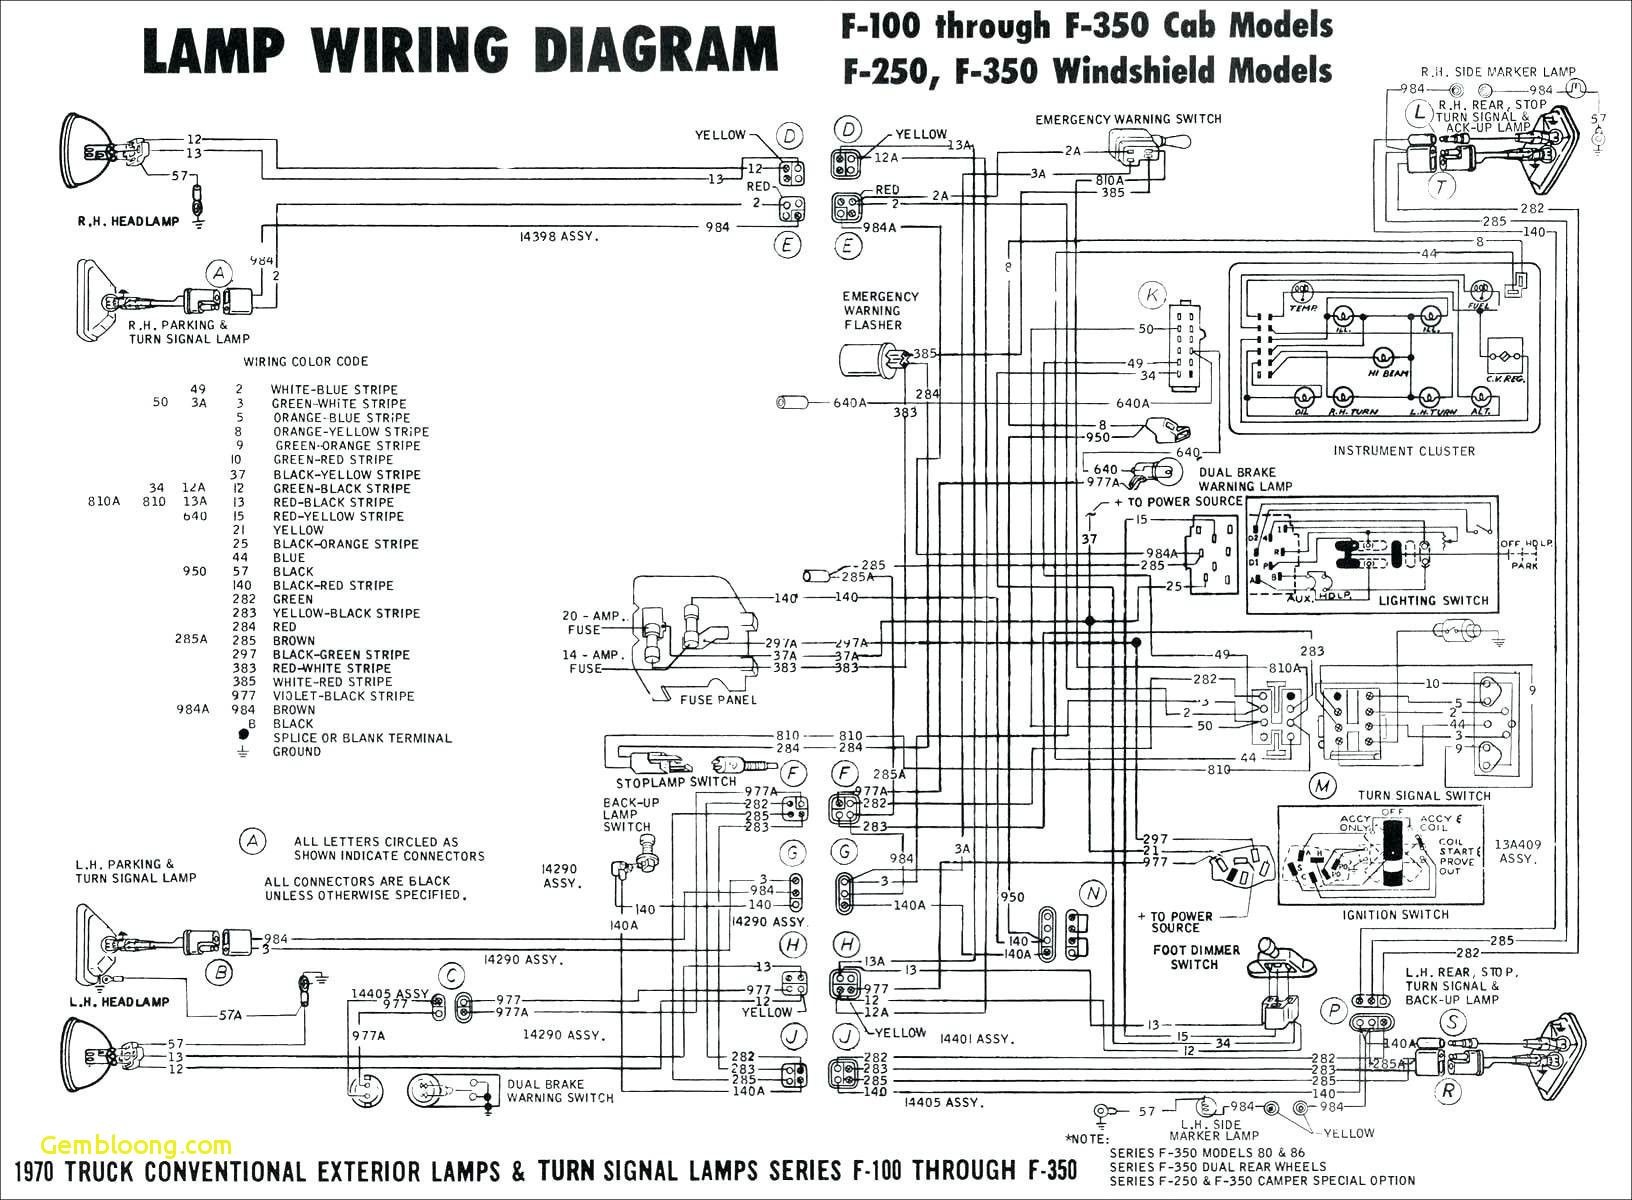 Light Switch Wiring Super M Tractor 20 References Free ford Wiring Diagrams Design